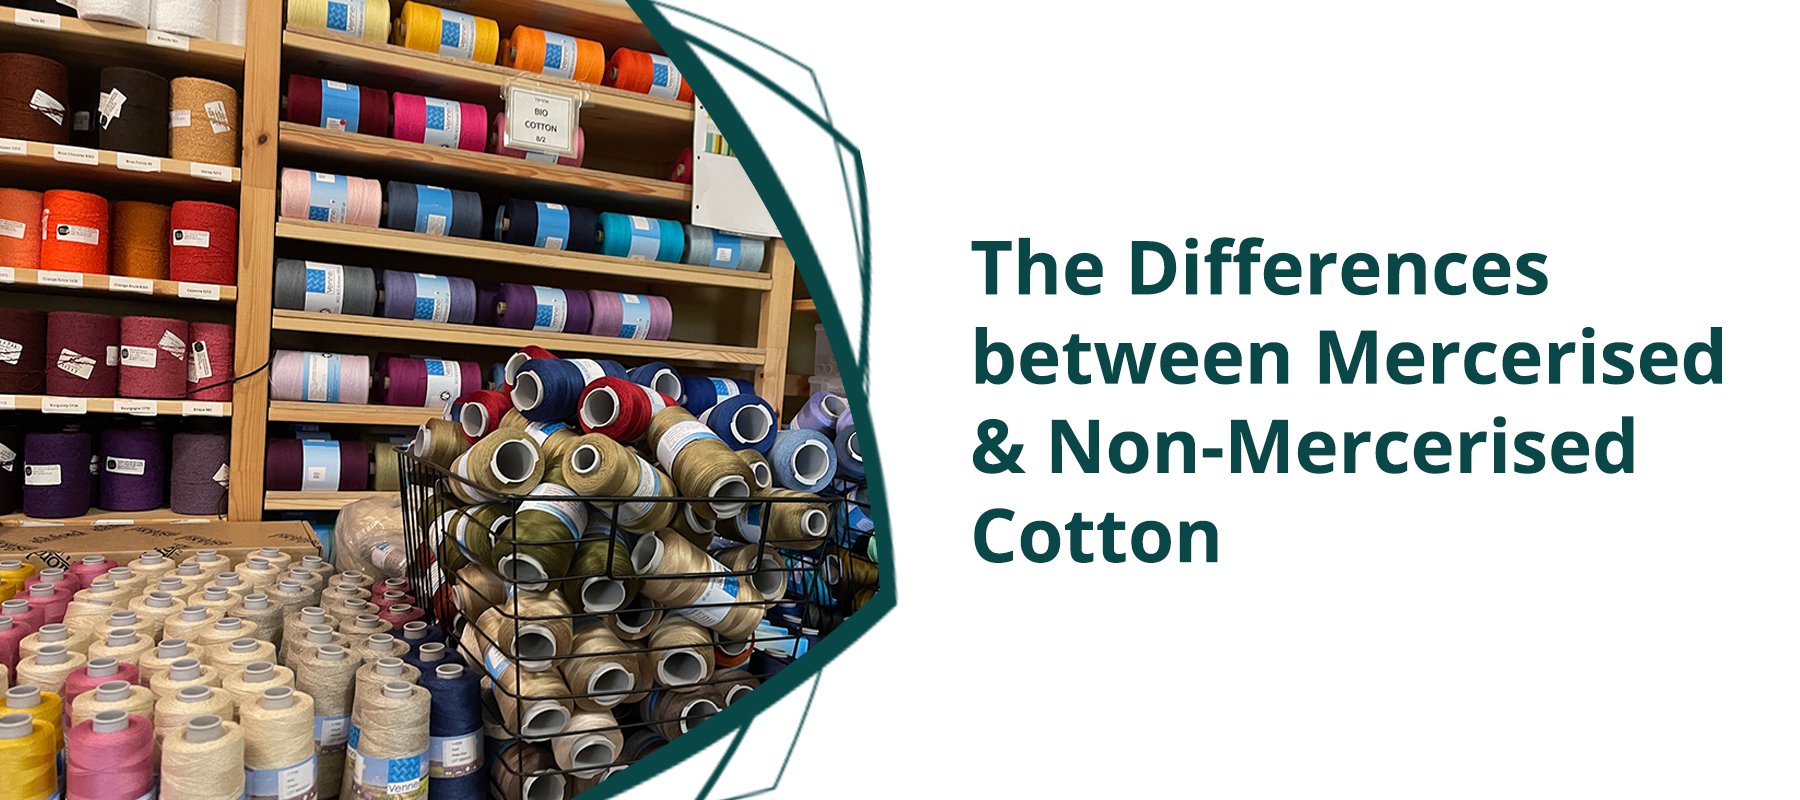 What is the Difference between Mercerised and Non-Mercerised Cotton?